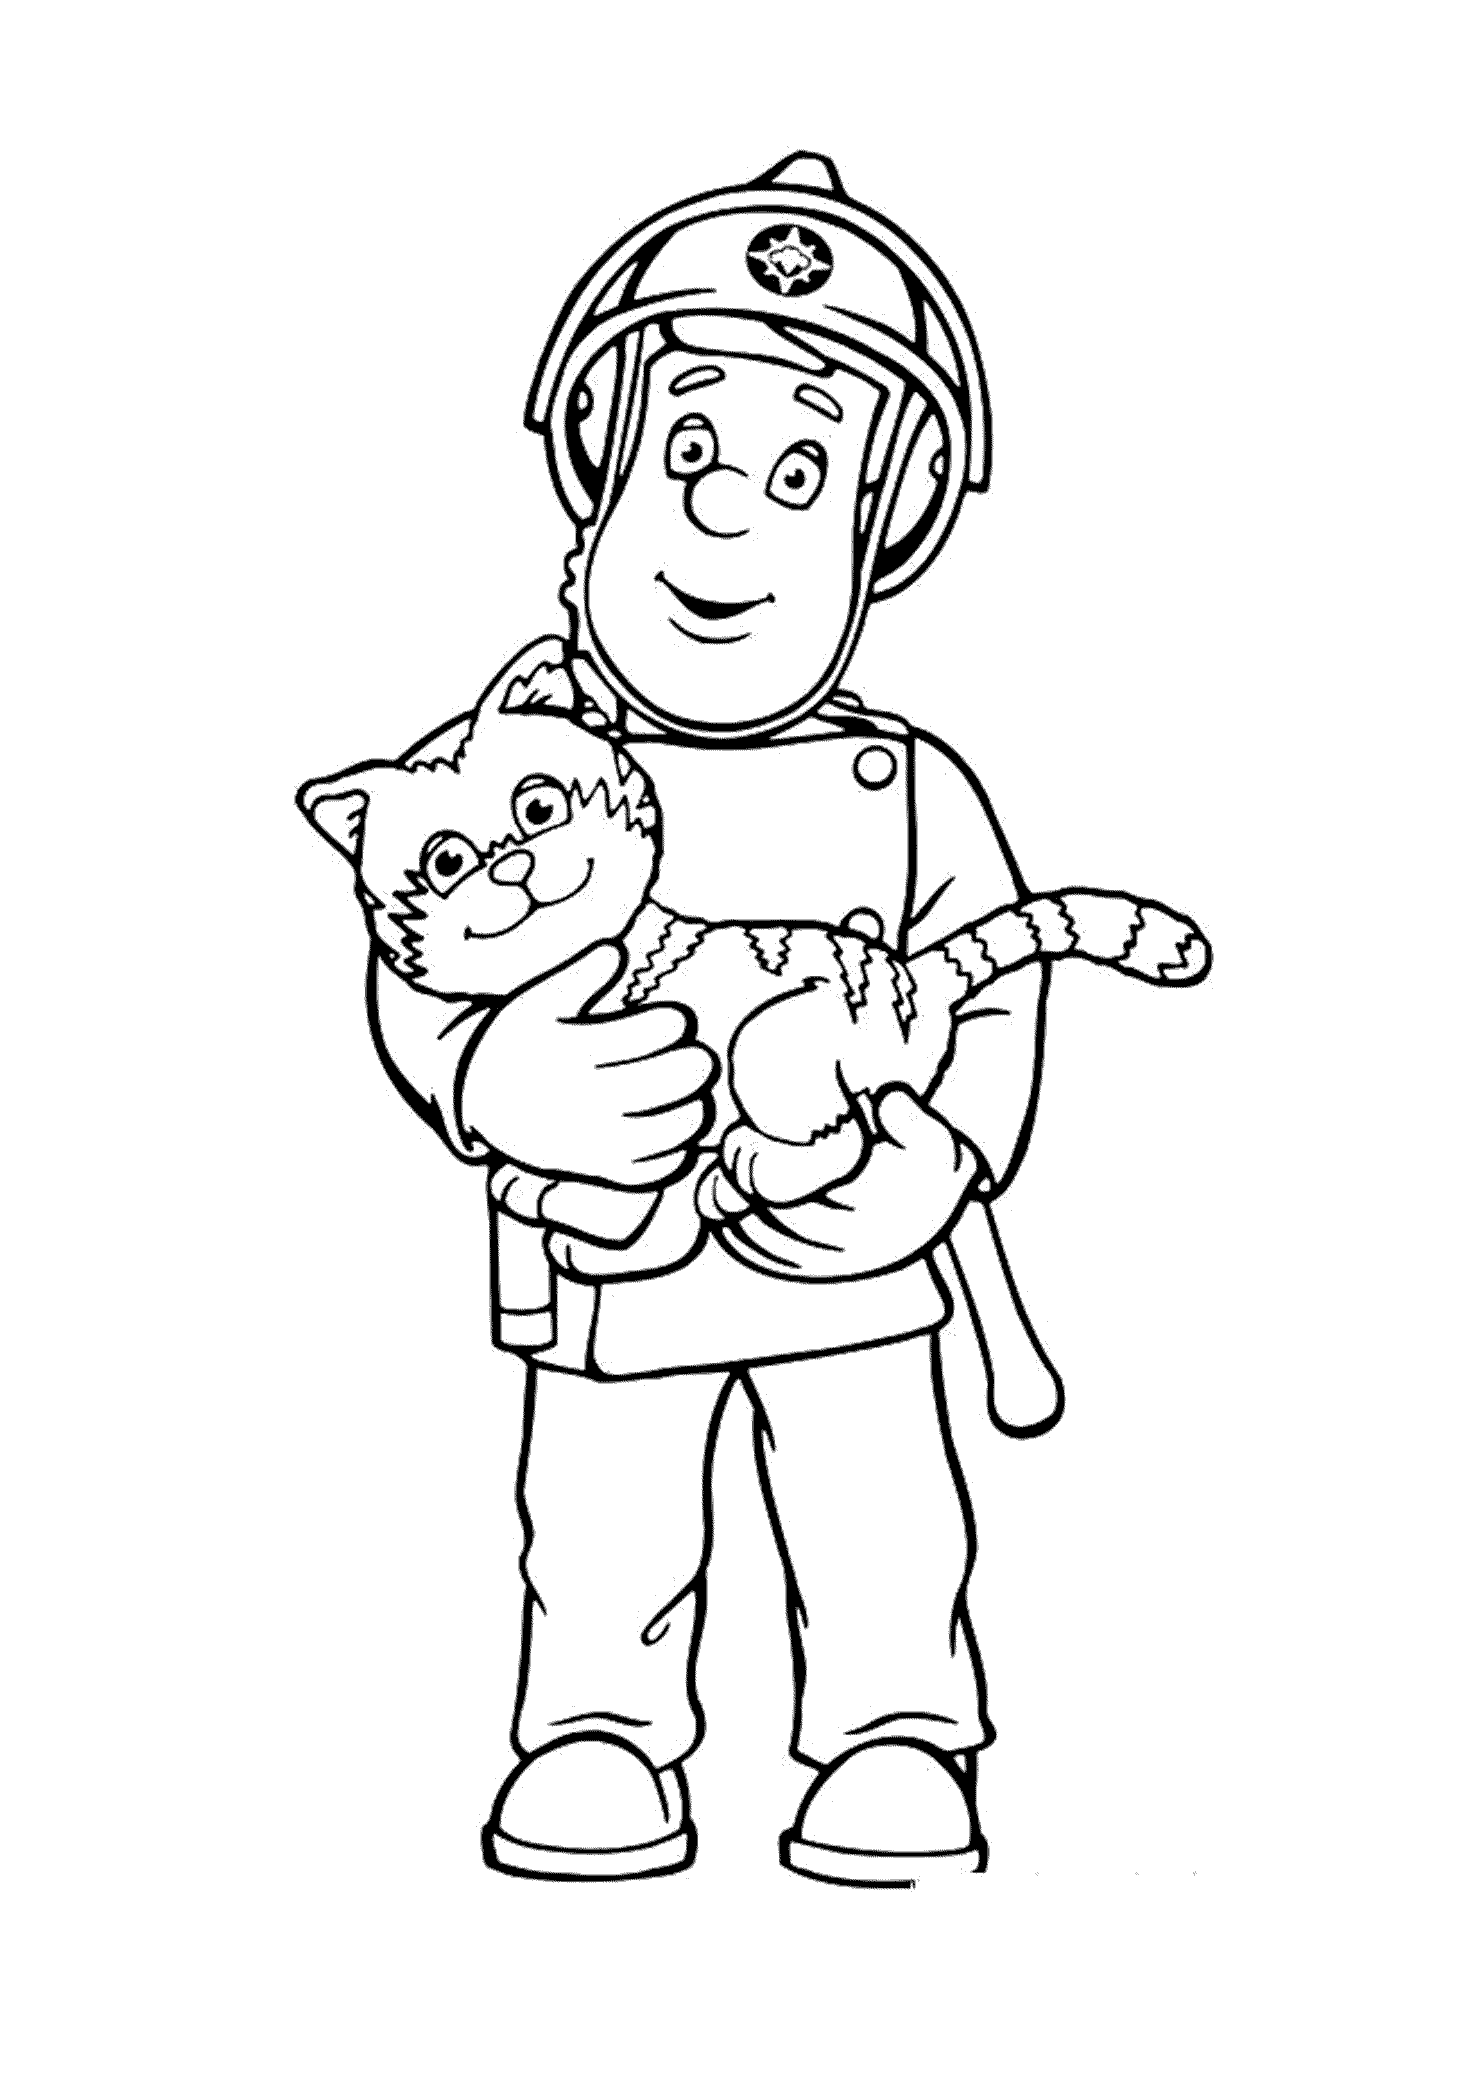 Fireman Sam coloring pages to download and print for free